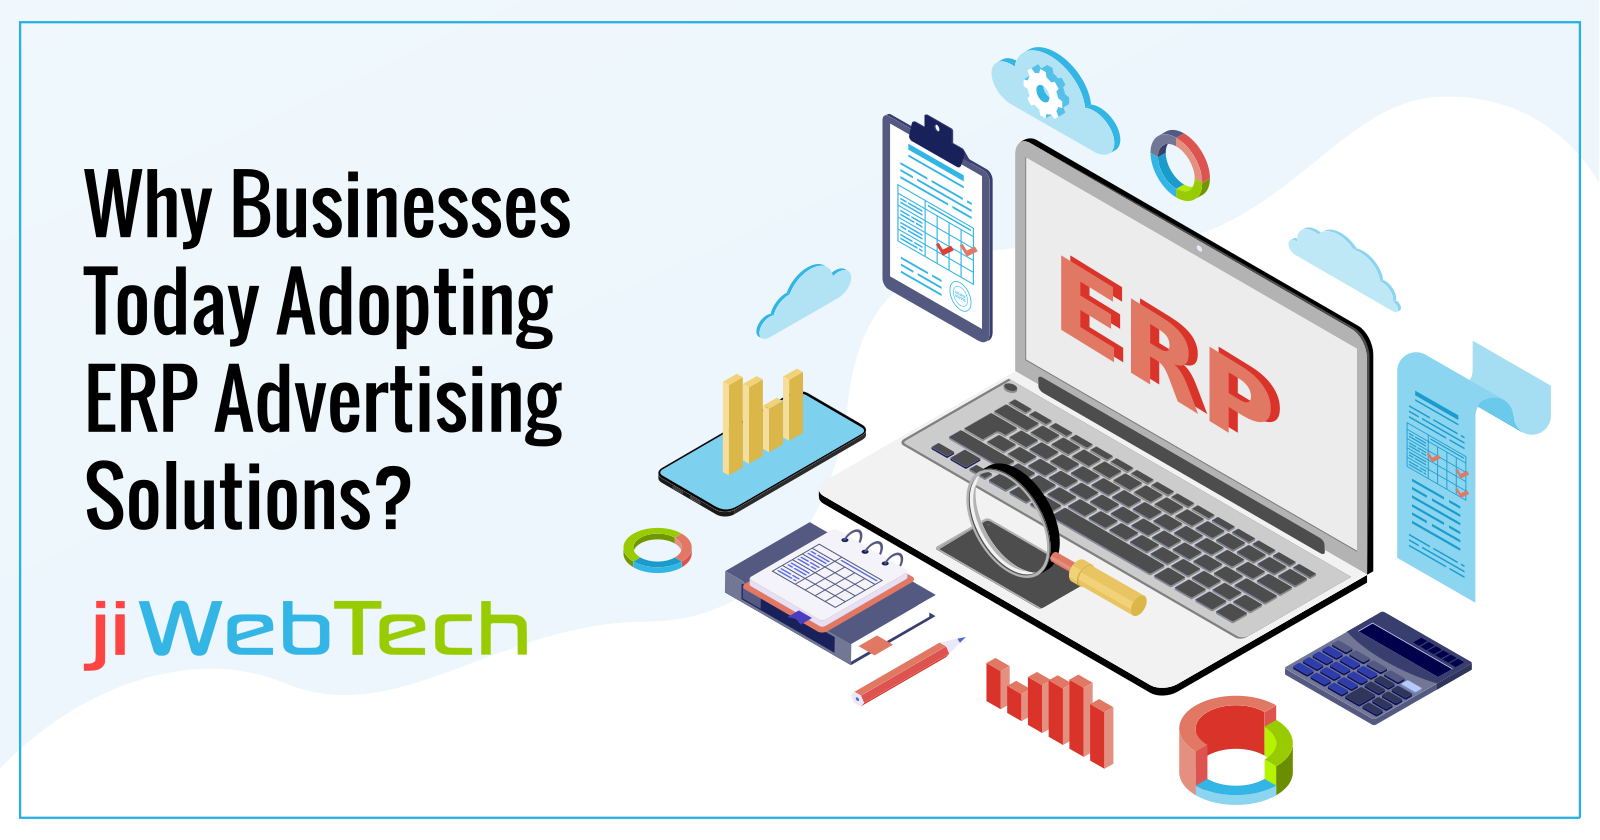 Why Businesses Today Adopting ERP Advertising Solutions?